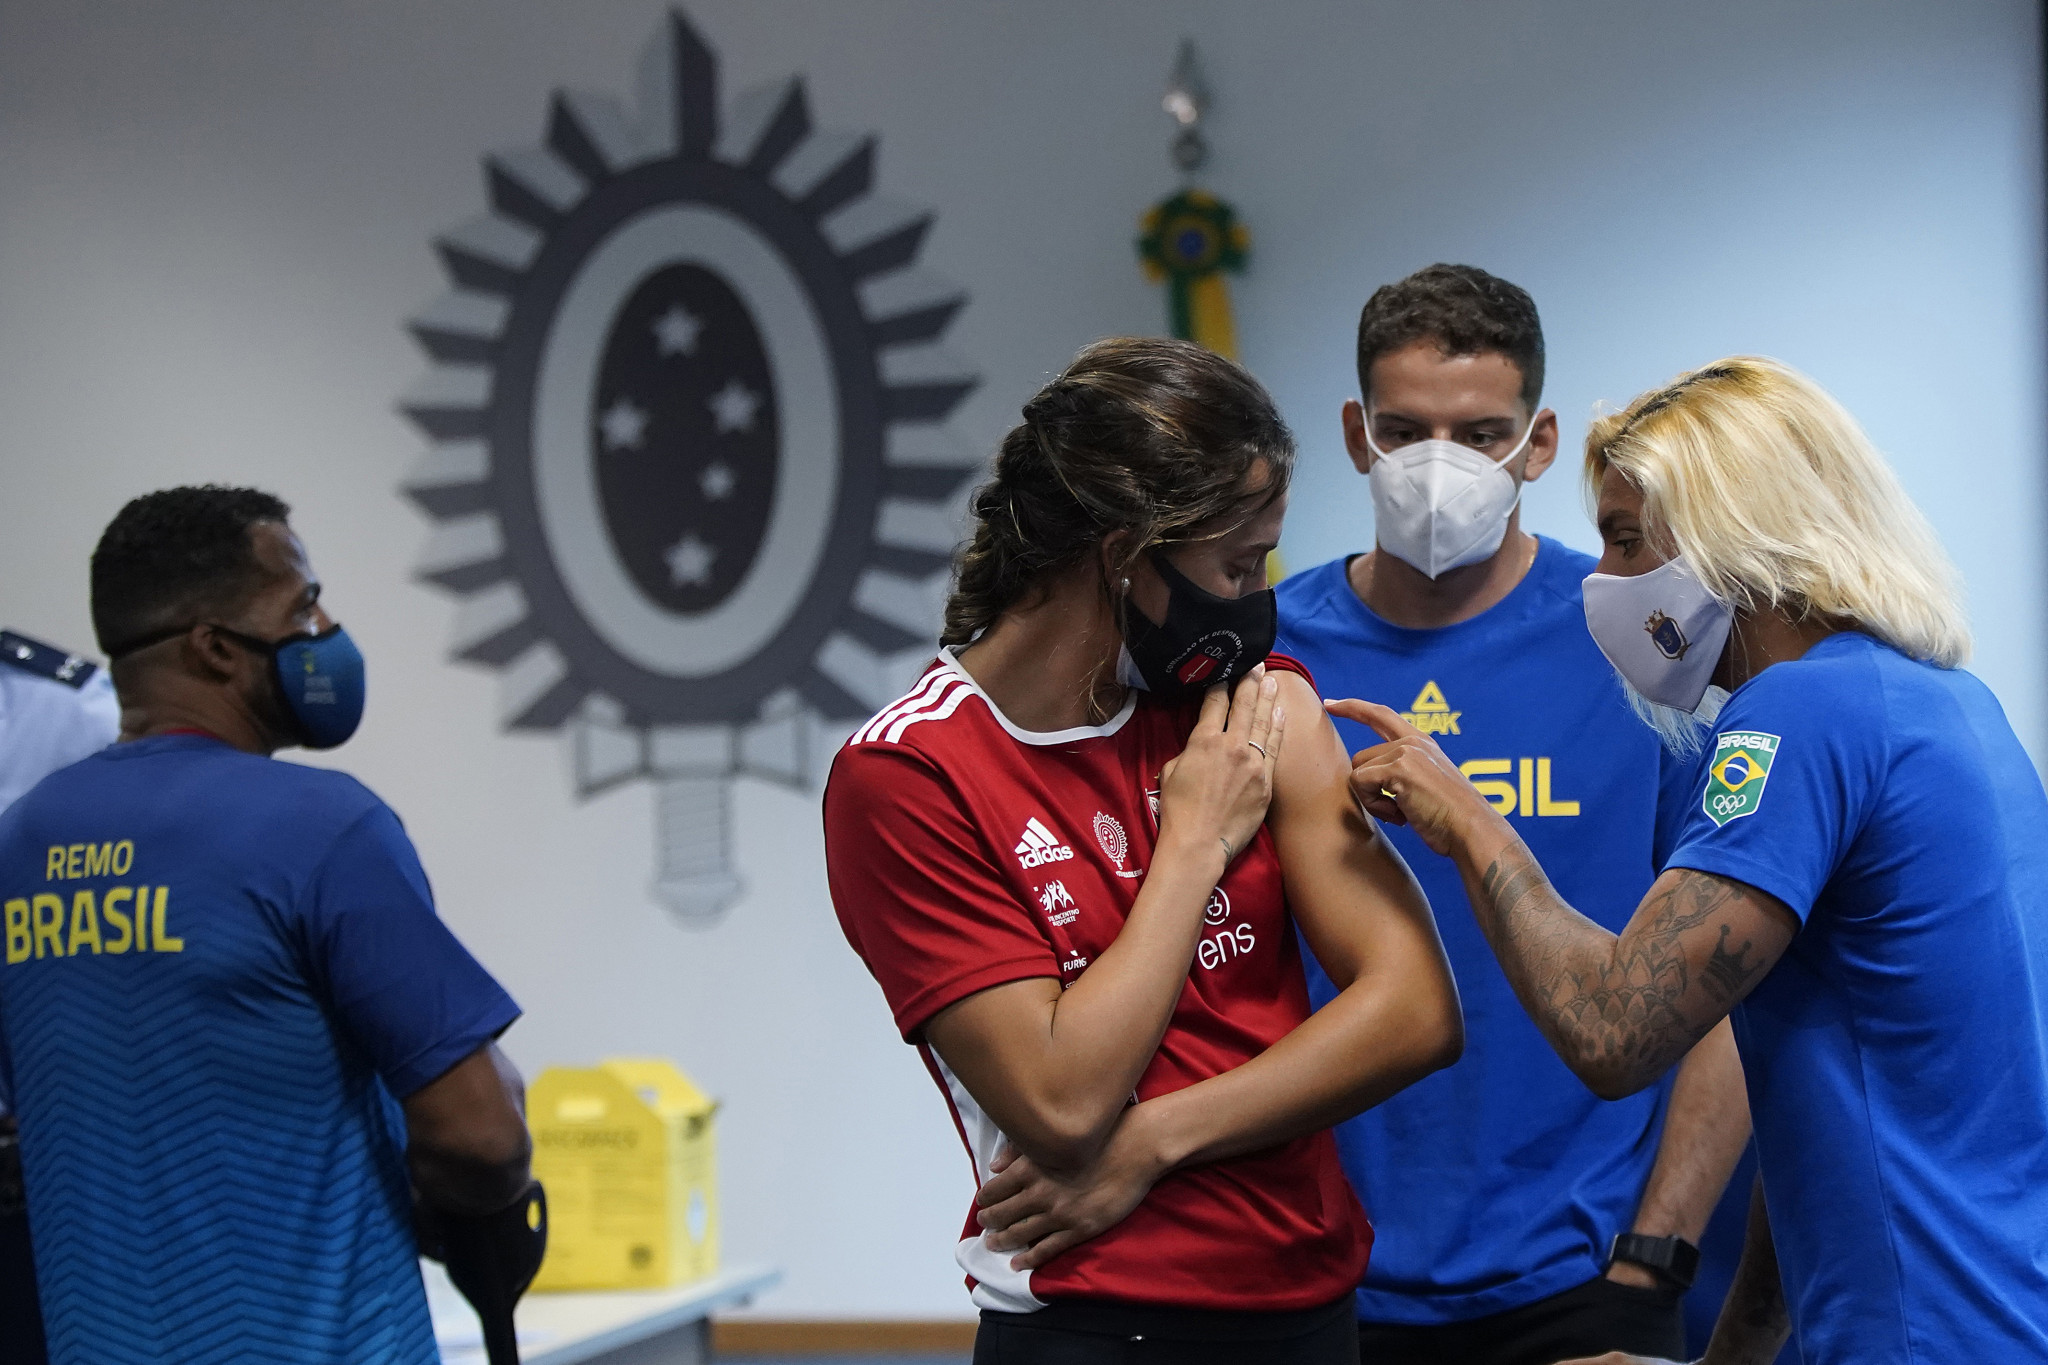 Foreign athletes were offered the opportunity of receiving COVID-19 vaccines before this year's Olympic Games in Tokyo under a programme run by the IOC in association with Pfizer ©Getty Images